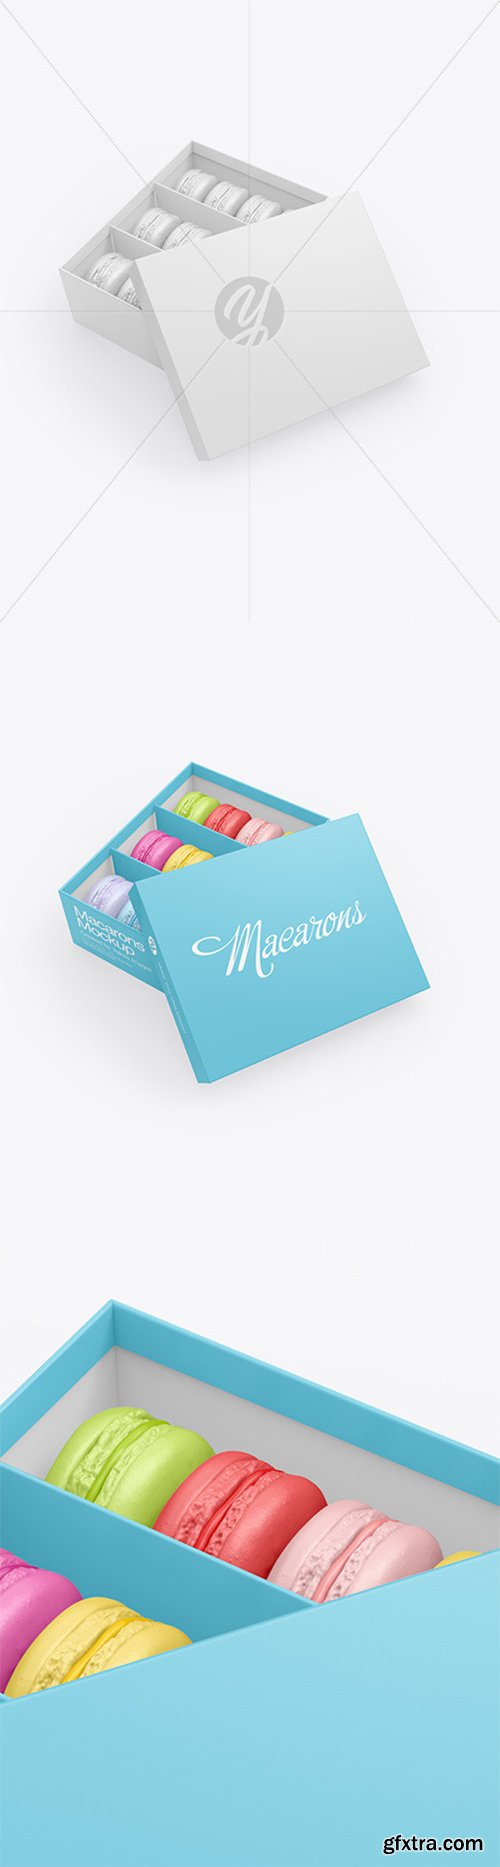 Opened Paper Box With Macarons Mockup 65626